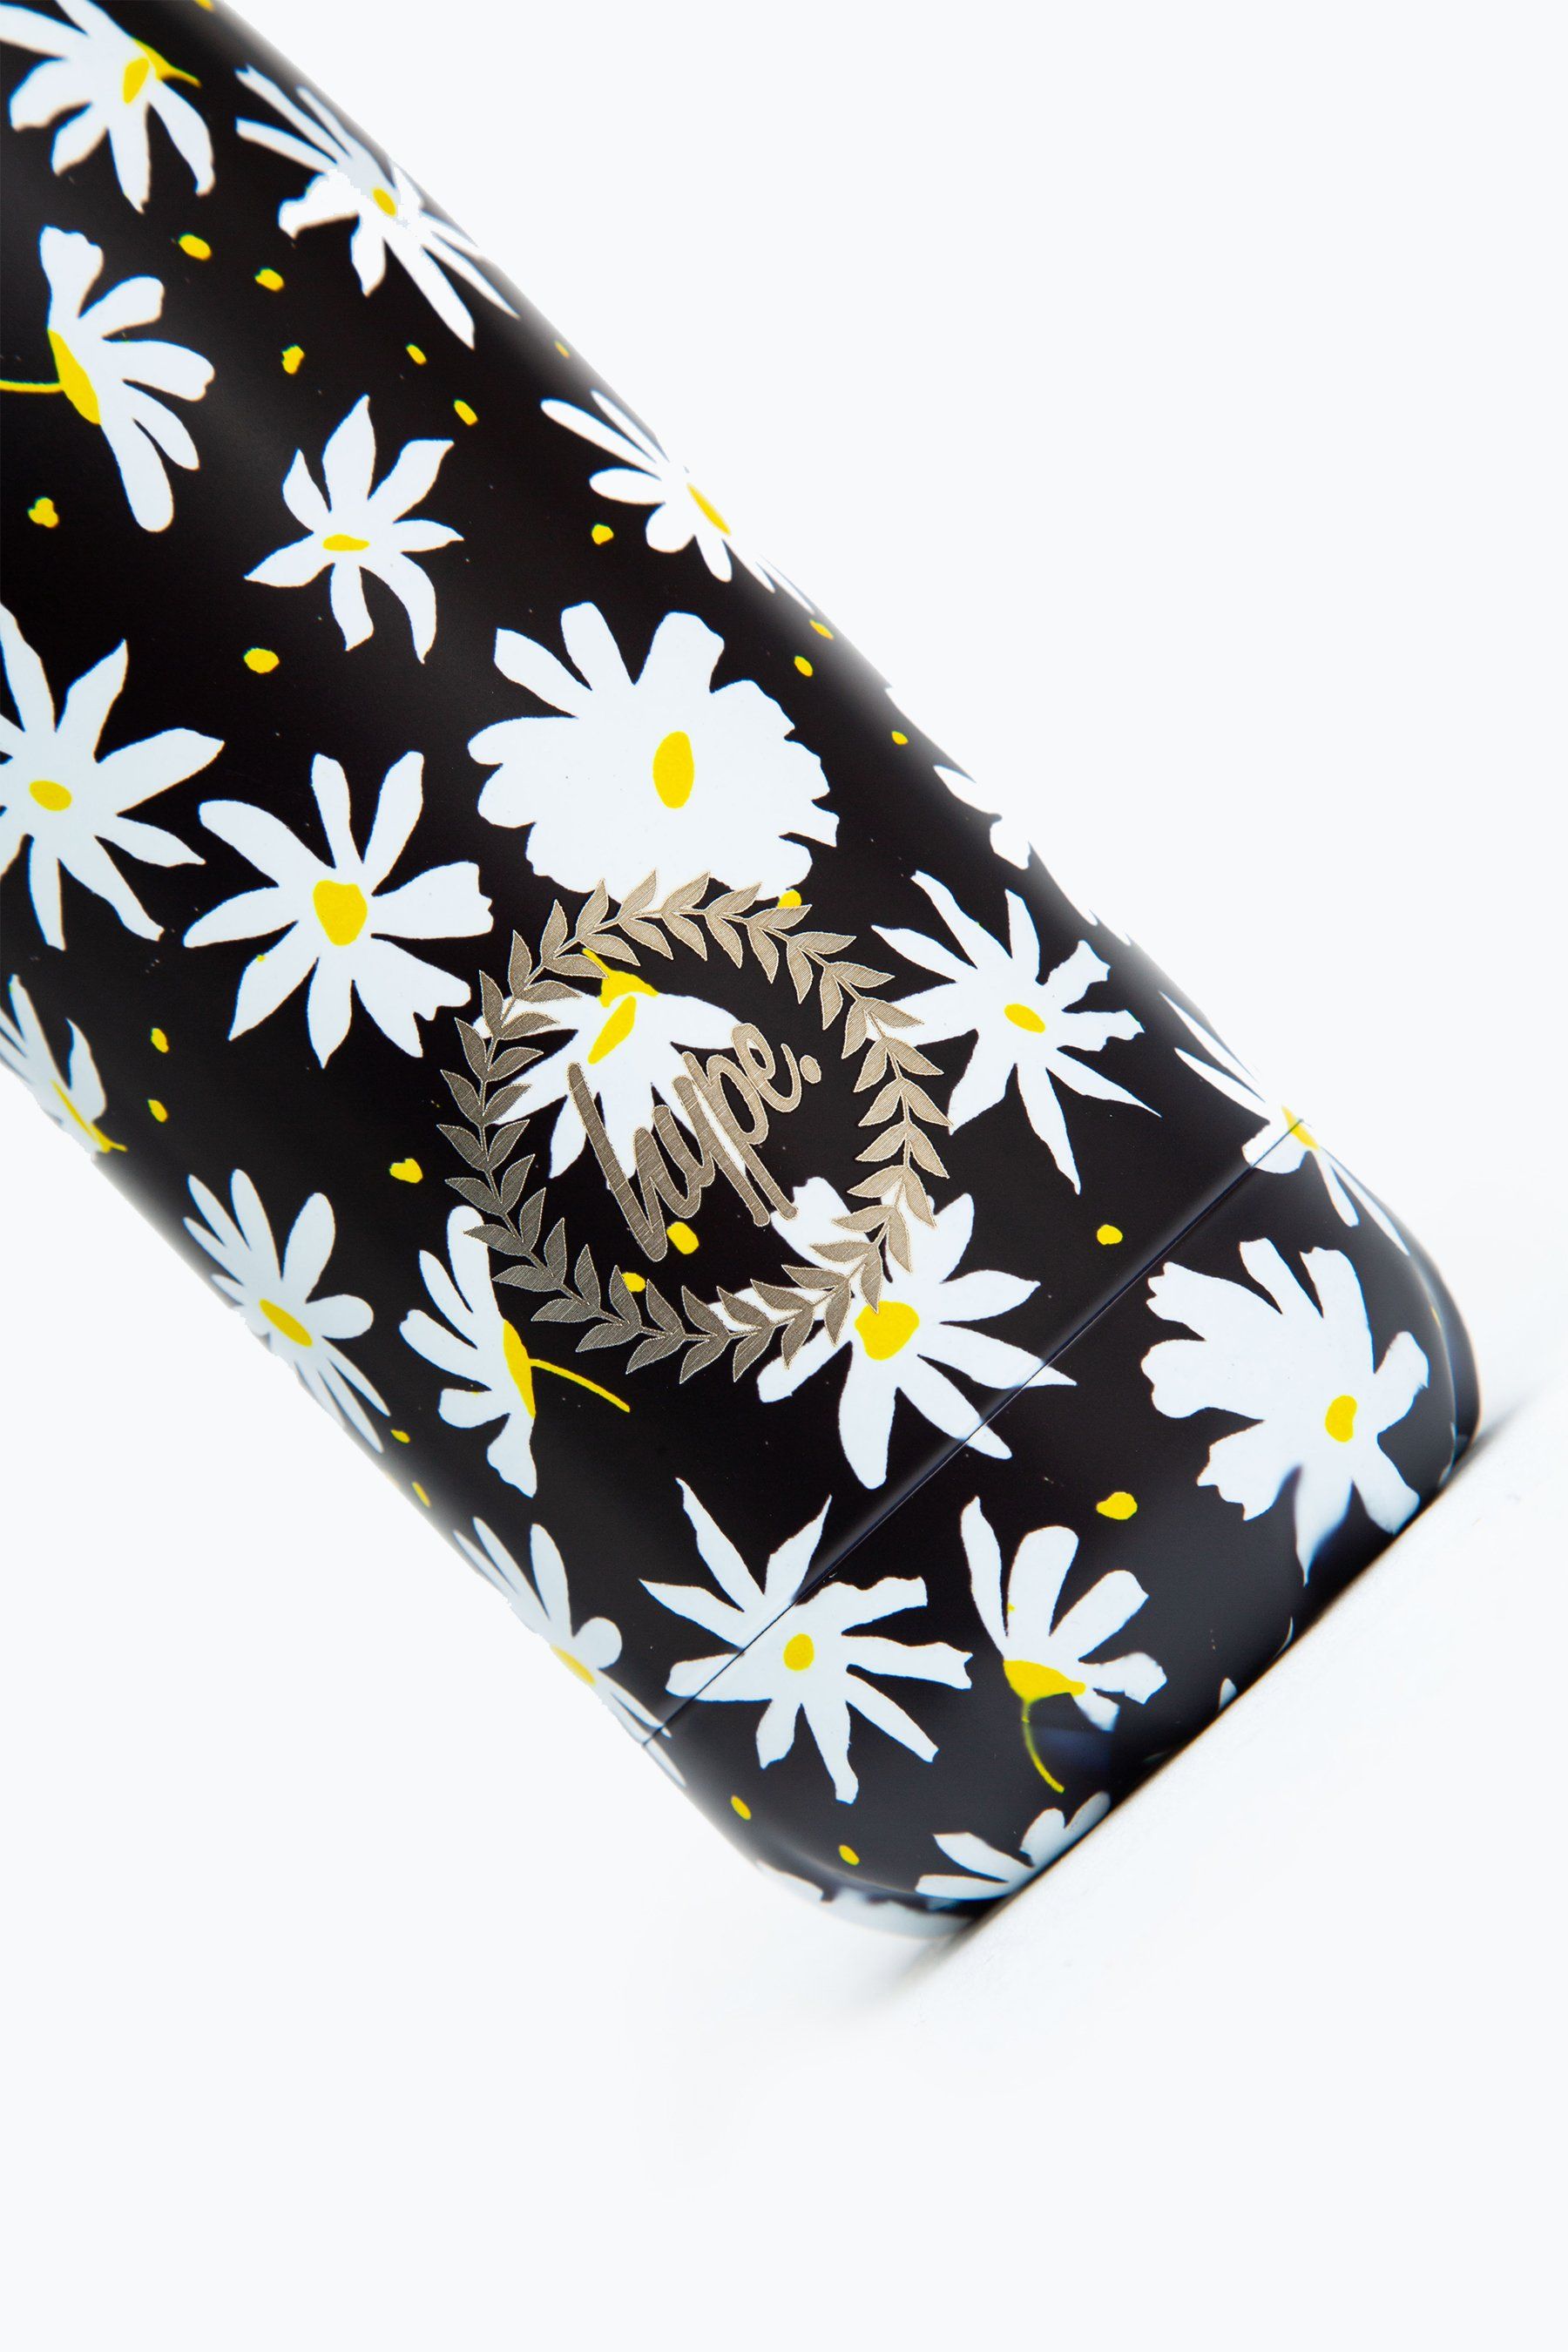 Meet the HYPE. Black Daisies Metal Reusable Bottle, perfect for when you're on the go. Designed in Aluminium to ensure your water stays ice-cold and for chillier days, keeping your oat milk latte warm for longer. The design features a monochrome colour palette with a yellow injection, boasting an all-over daisy repeat print. Finished with the iconic HYPE. crest logo in white on the front. Why not grab one of our lunch bags or backpacks with a bottle holder to complete the look, we suggest grabbing the matching set.